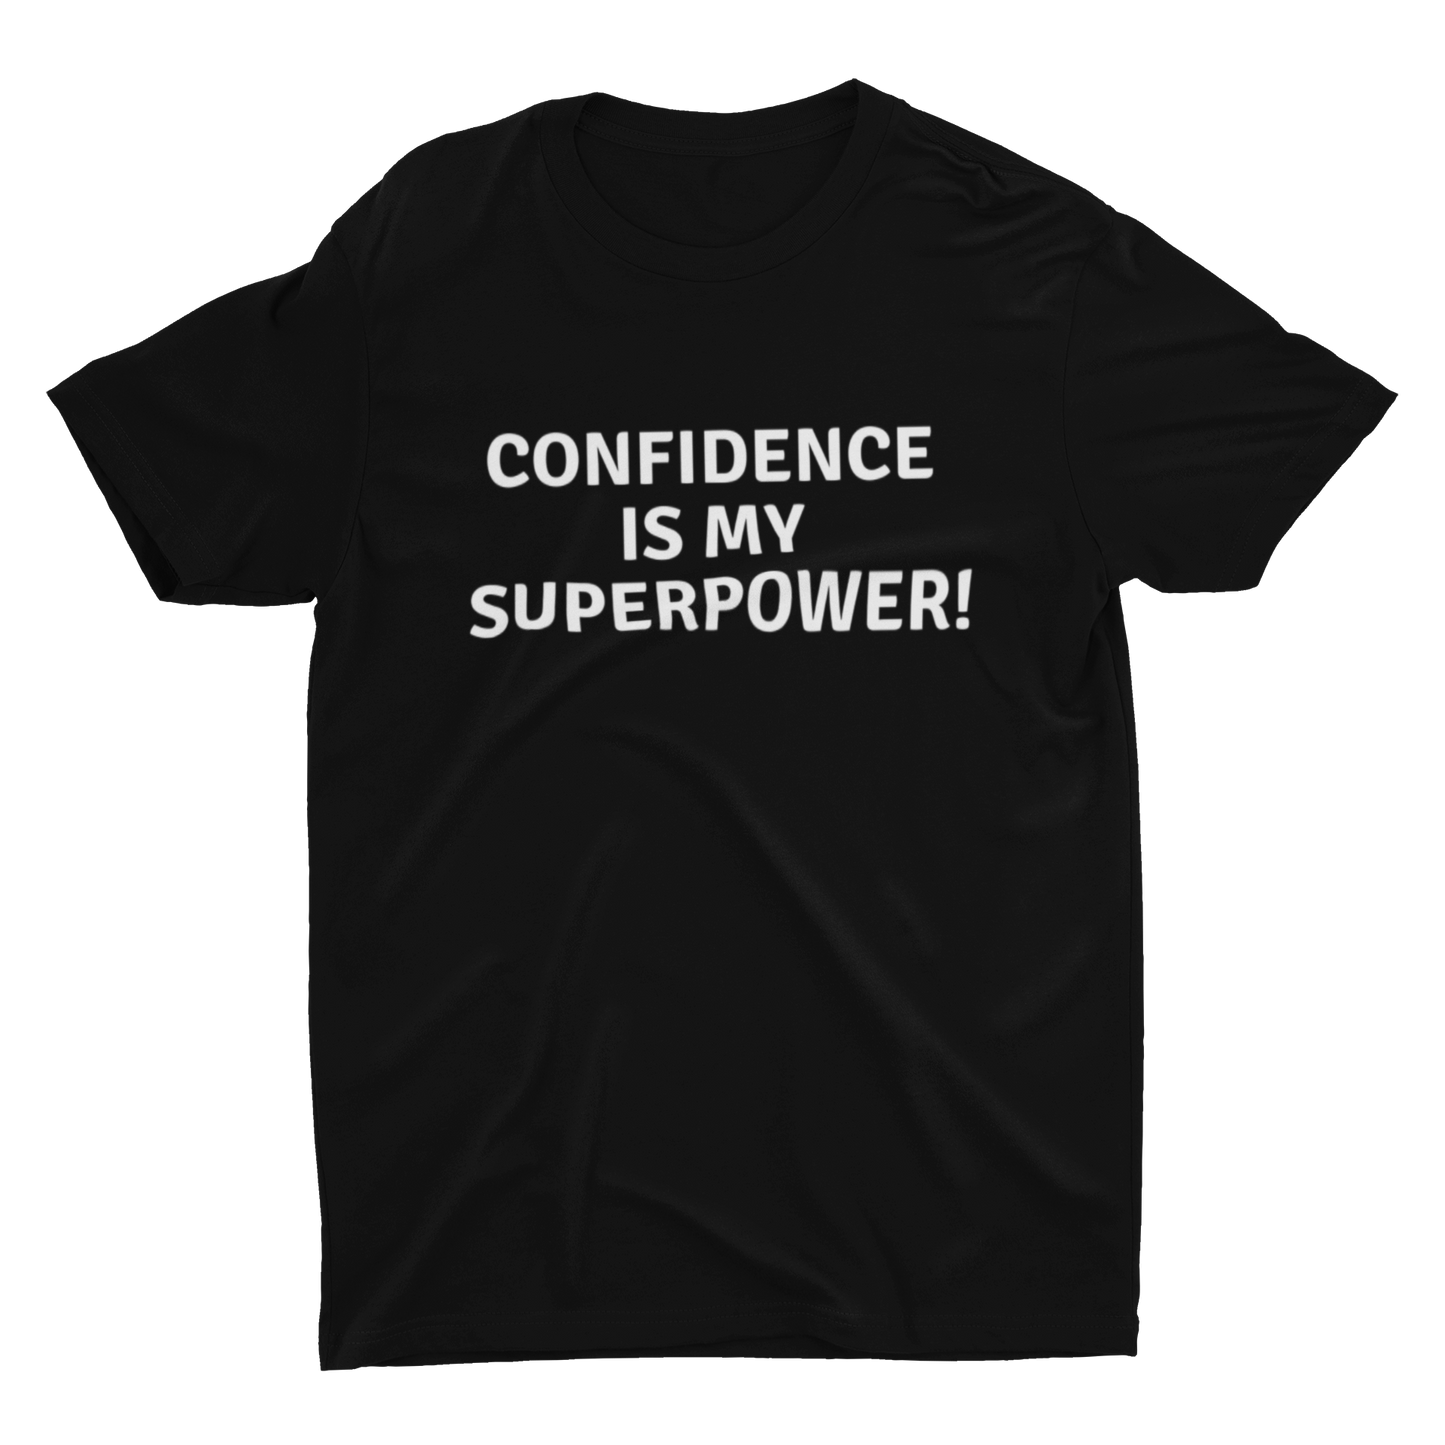 CONFIDENCE IS MY SUPERPOWER!